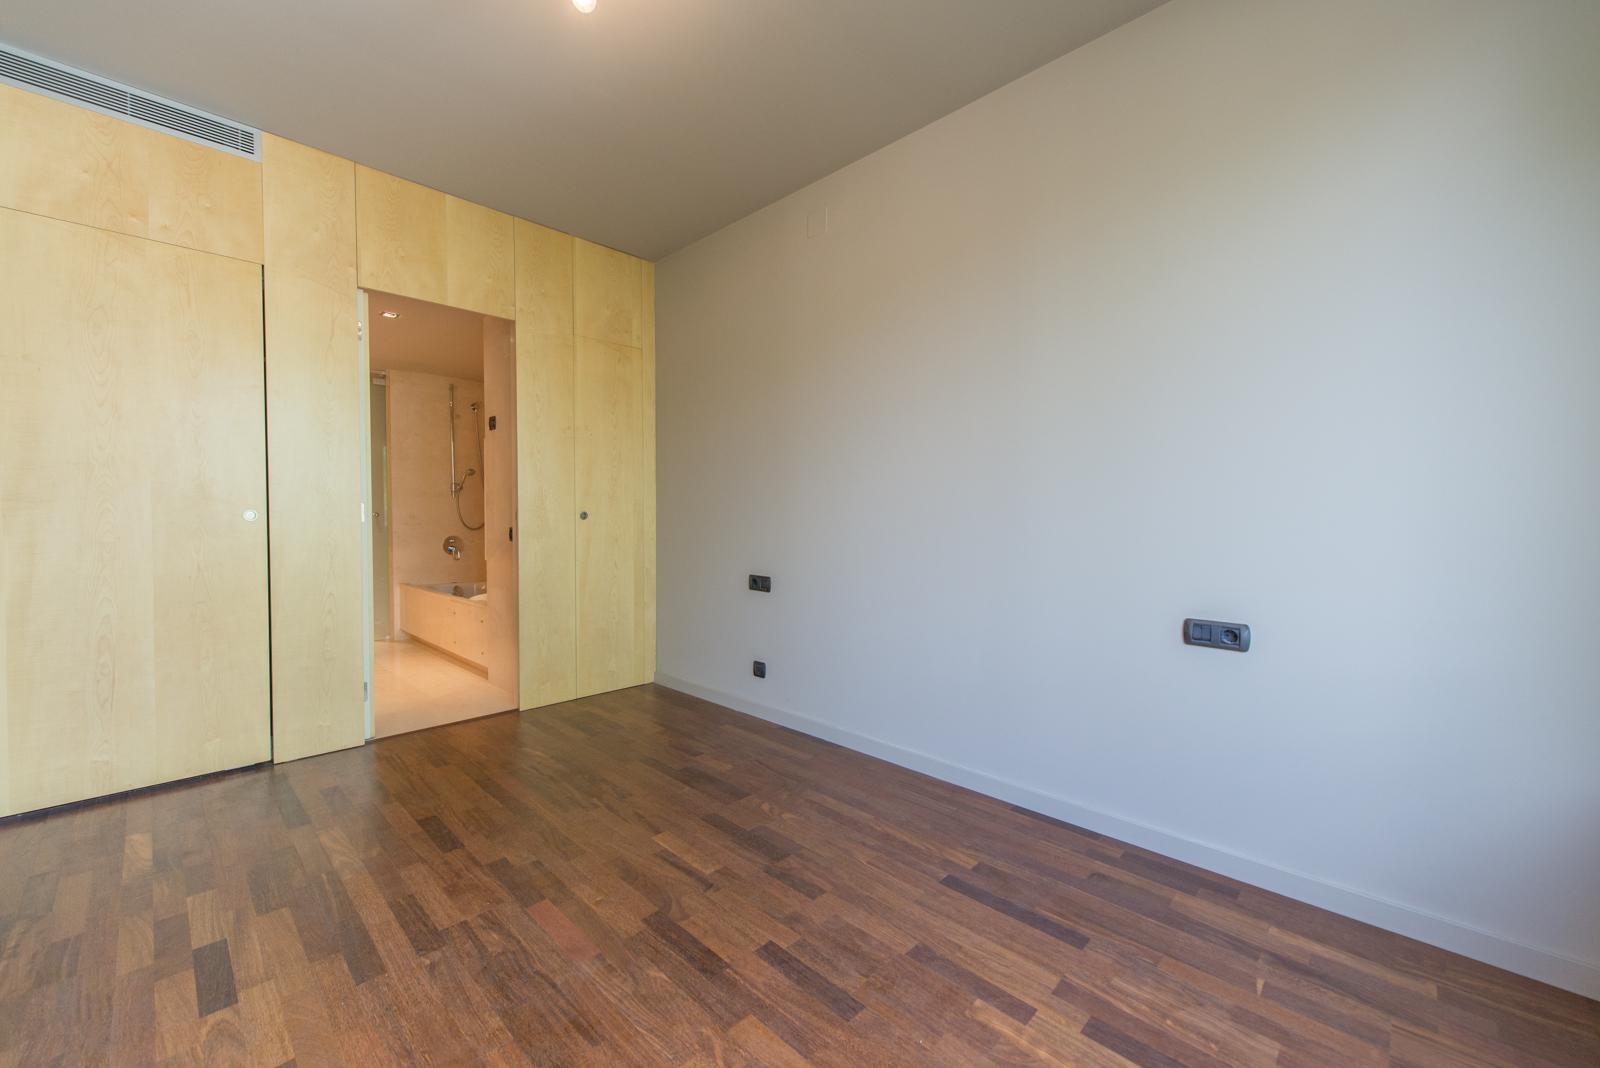 151215 Flat for sale in Gràcia, Vallcarca and les Penitents 7